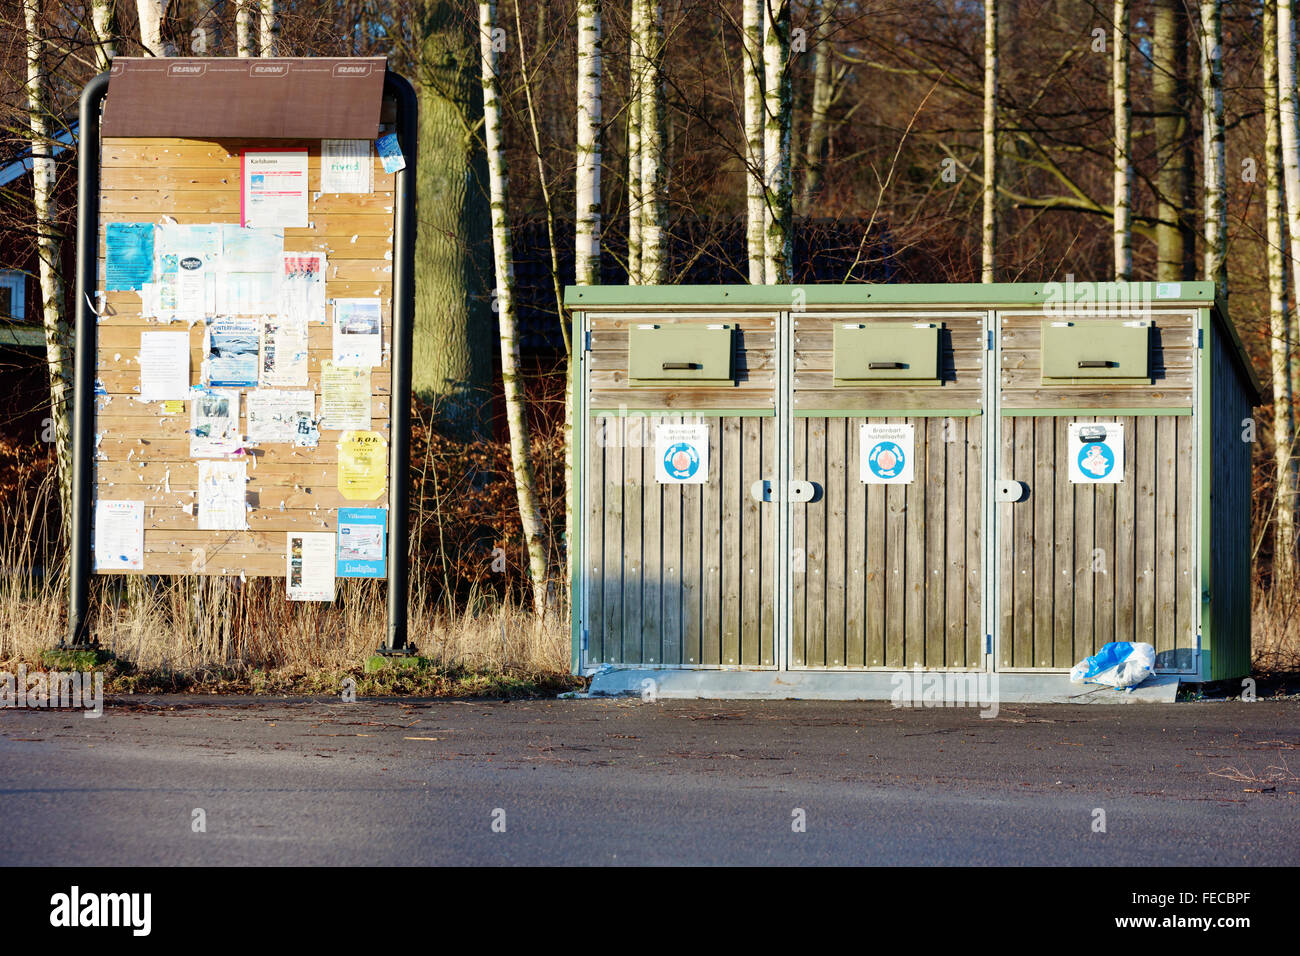 Karlshamn, Sweden - February 04, 2016: A notice board full of messages and a small waste station with forest in background. Stre Stock Photo